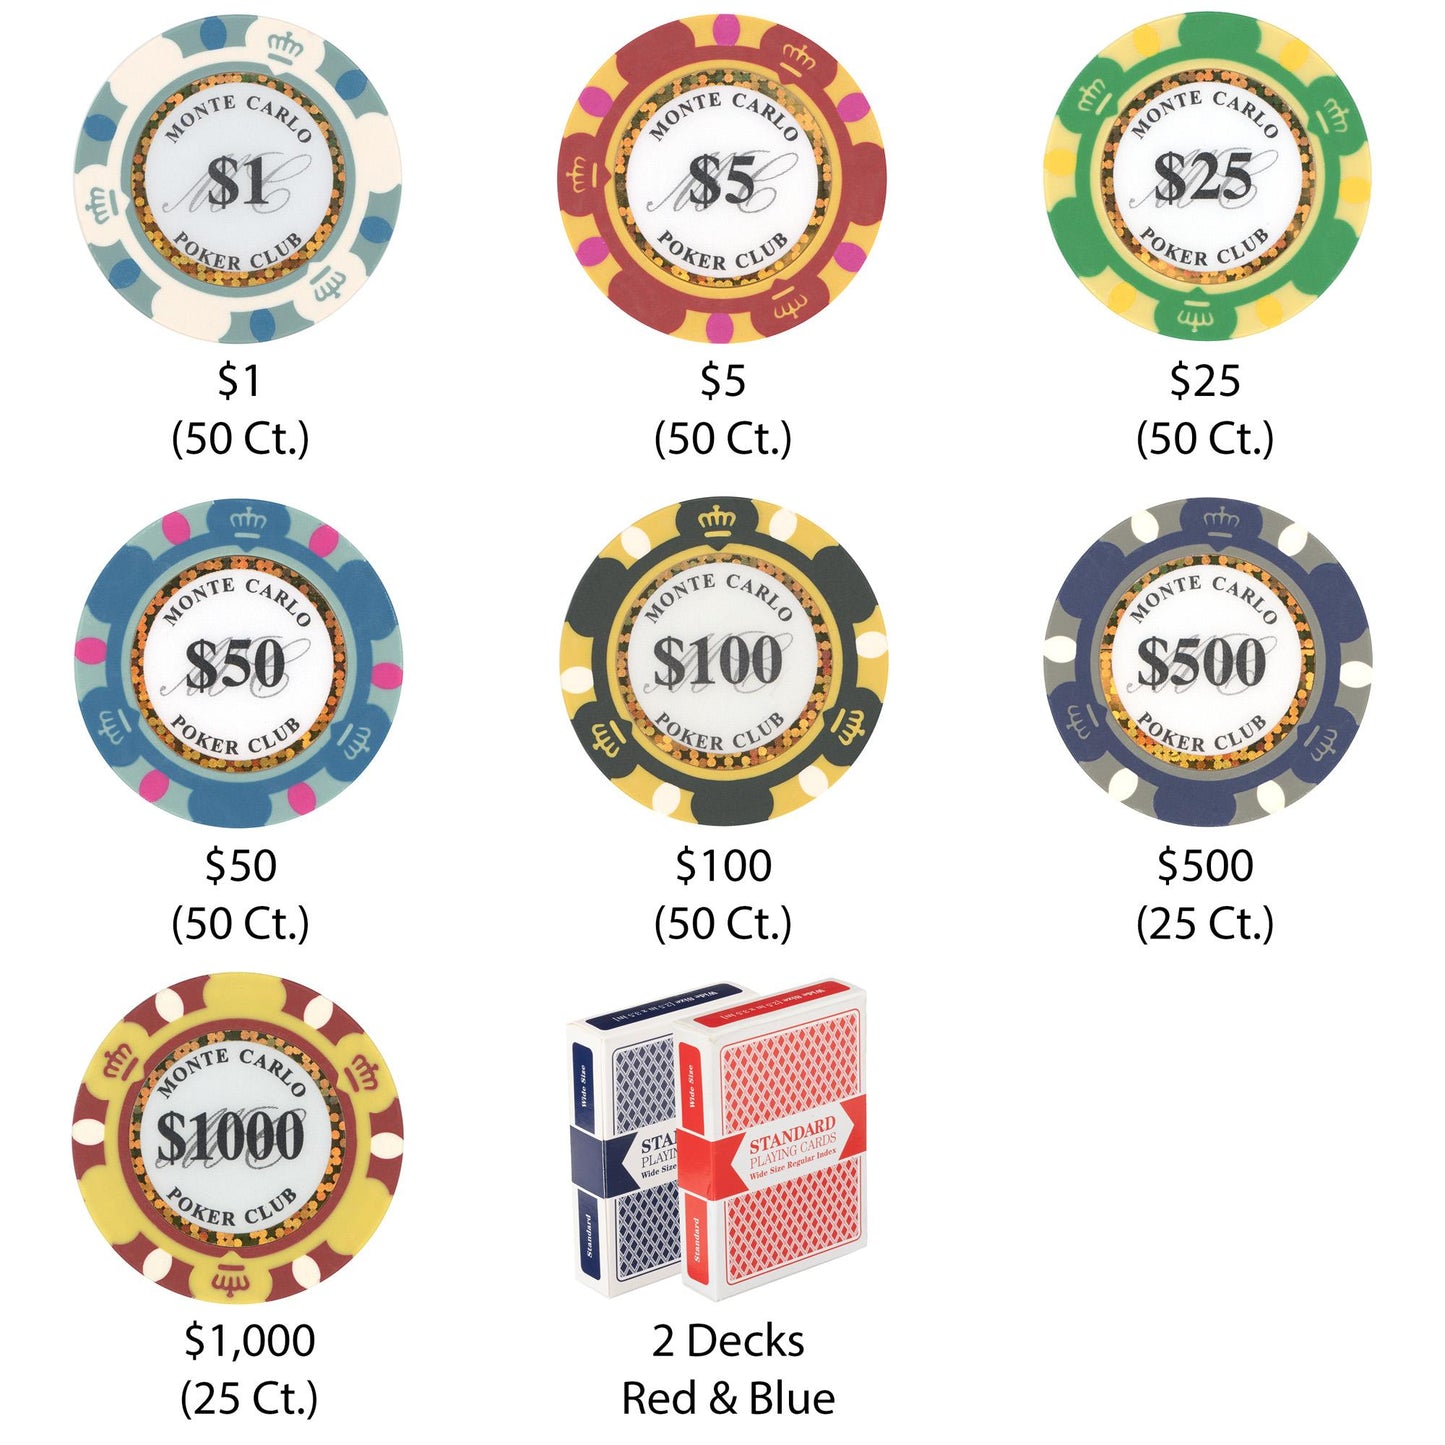 300 Monte Carlo Poker Chips with Wooden Carousel